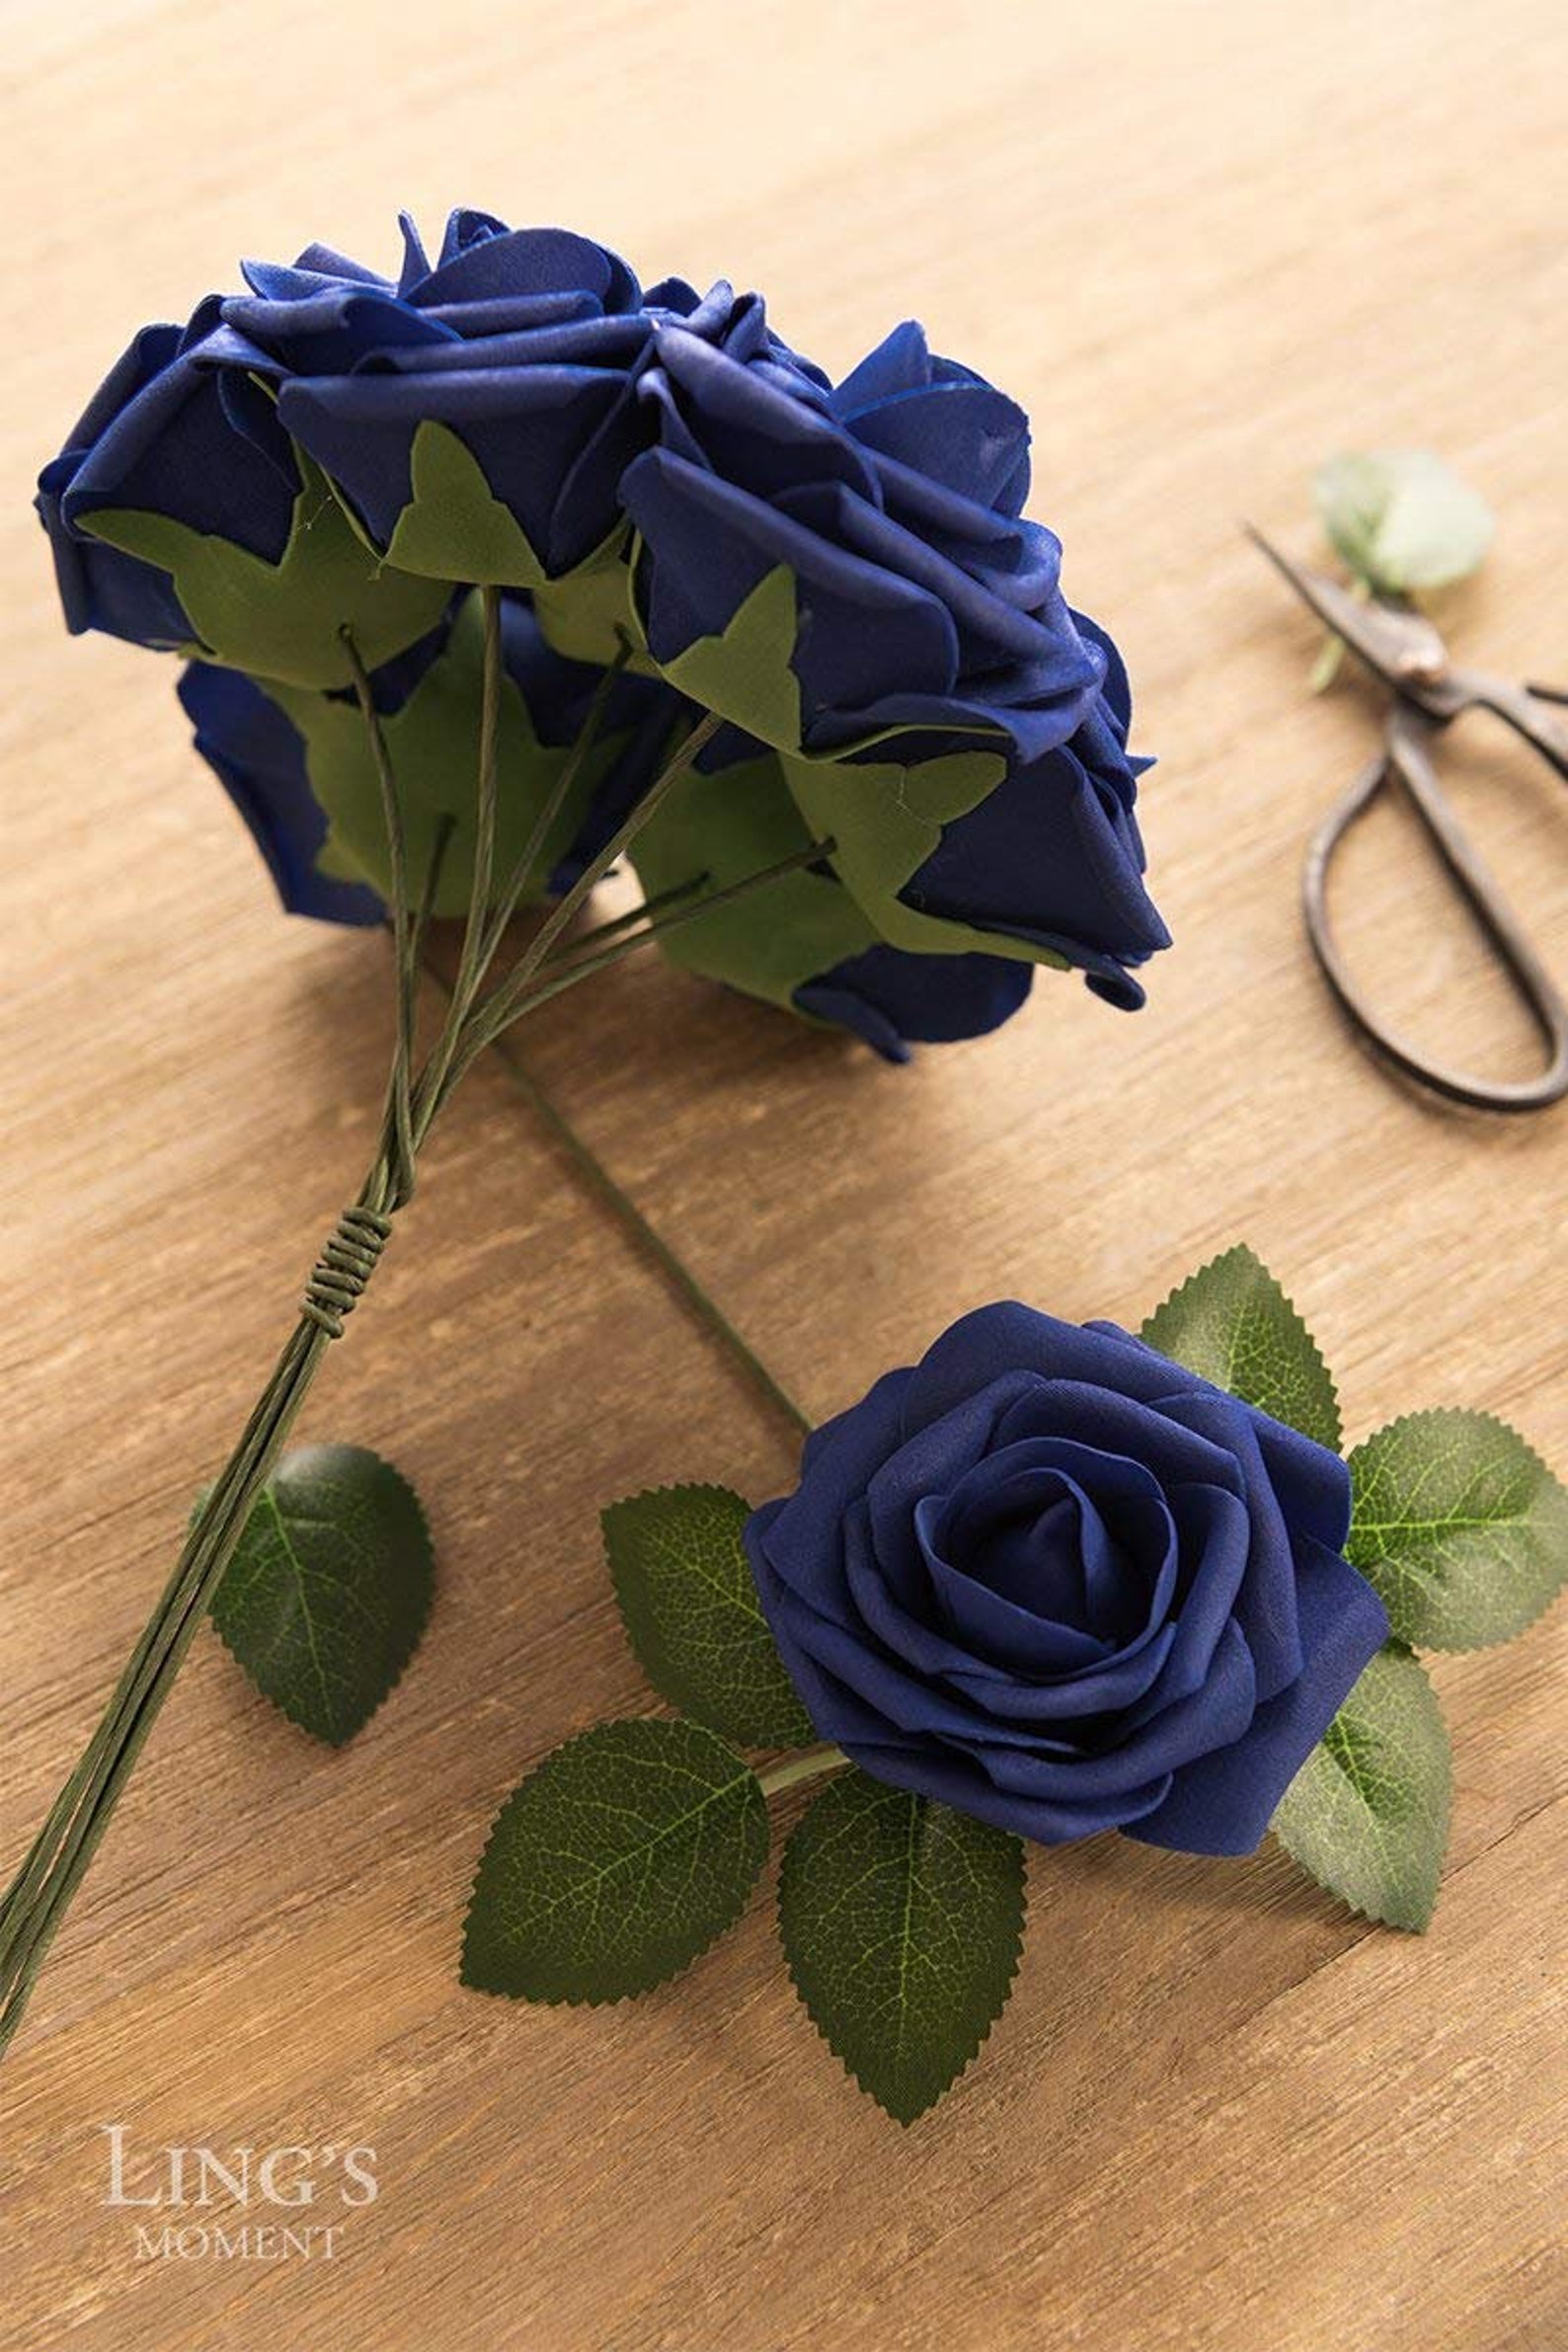 Artificial Flowers Royal Blue Roses 50pcs Real Looking Fake | Etsy